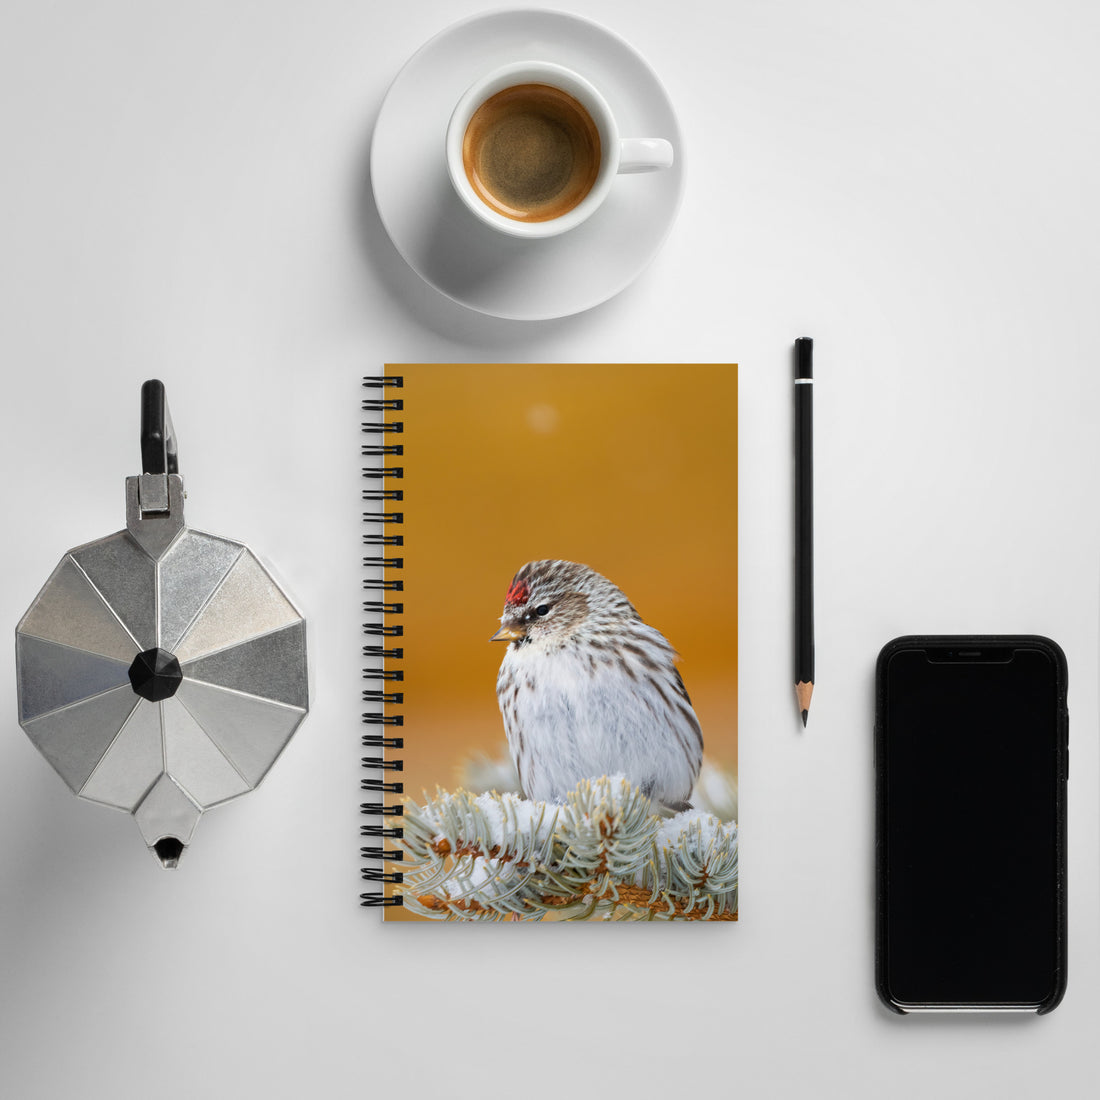 Common Redpoll Spiral notebook